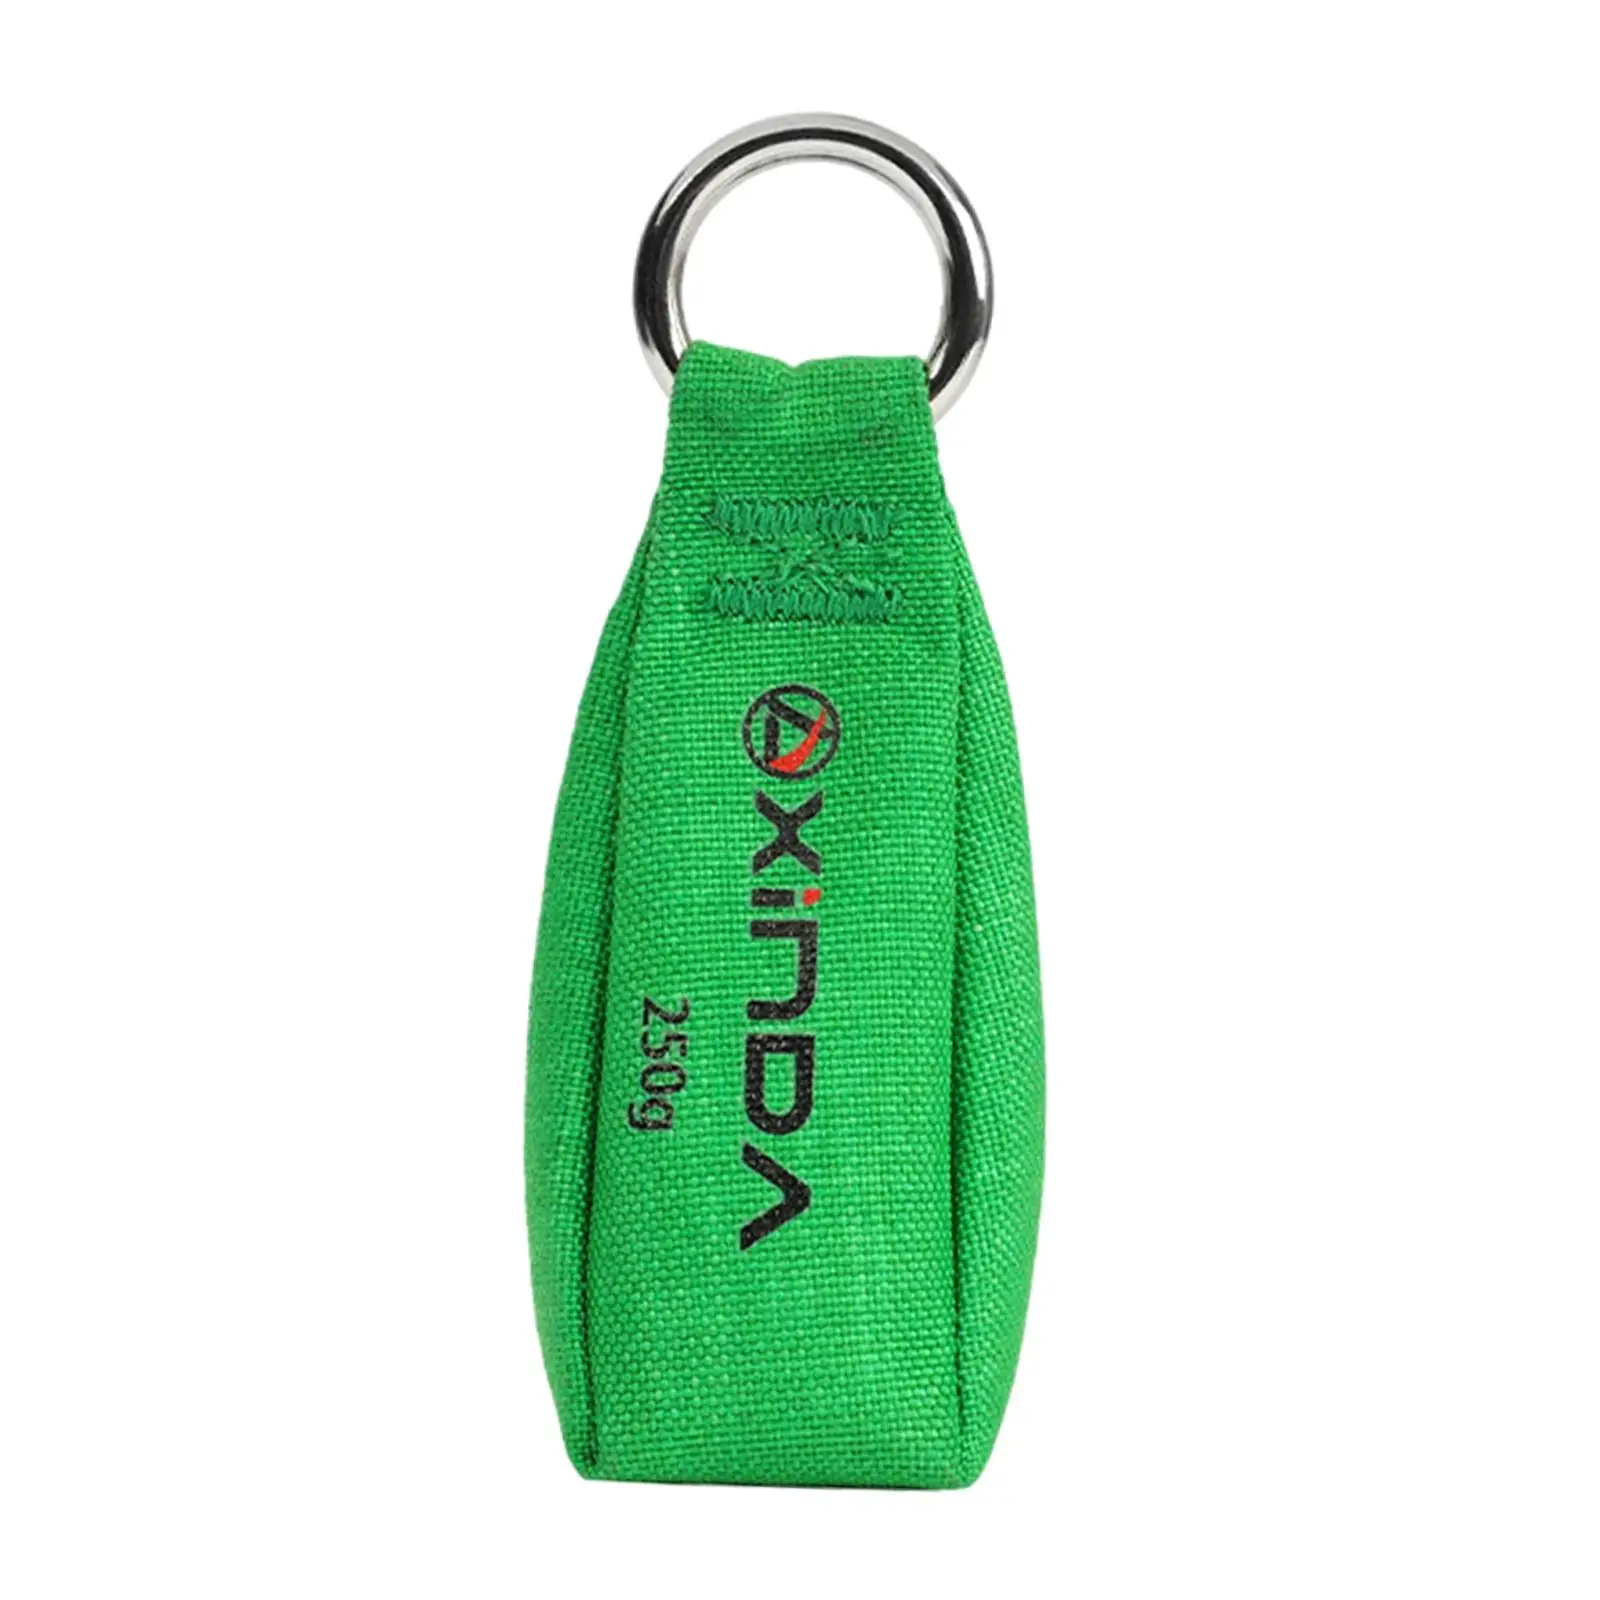 Throw Weight Nylon Fabric with Metal Loop Throwing Bag for Mountaineering Tree